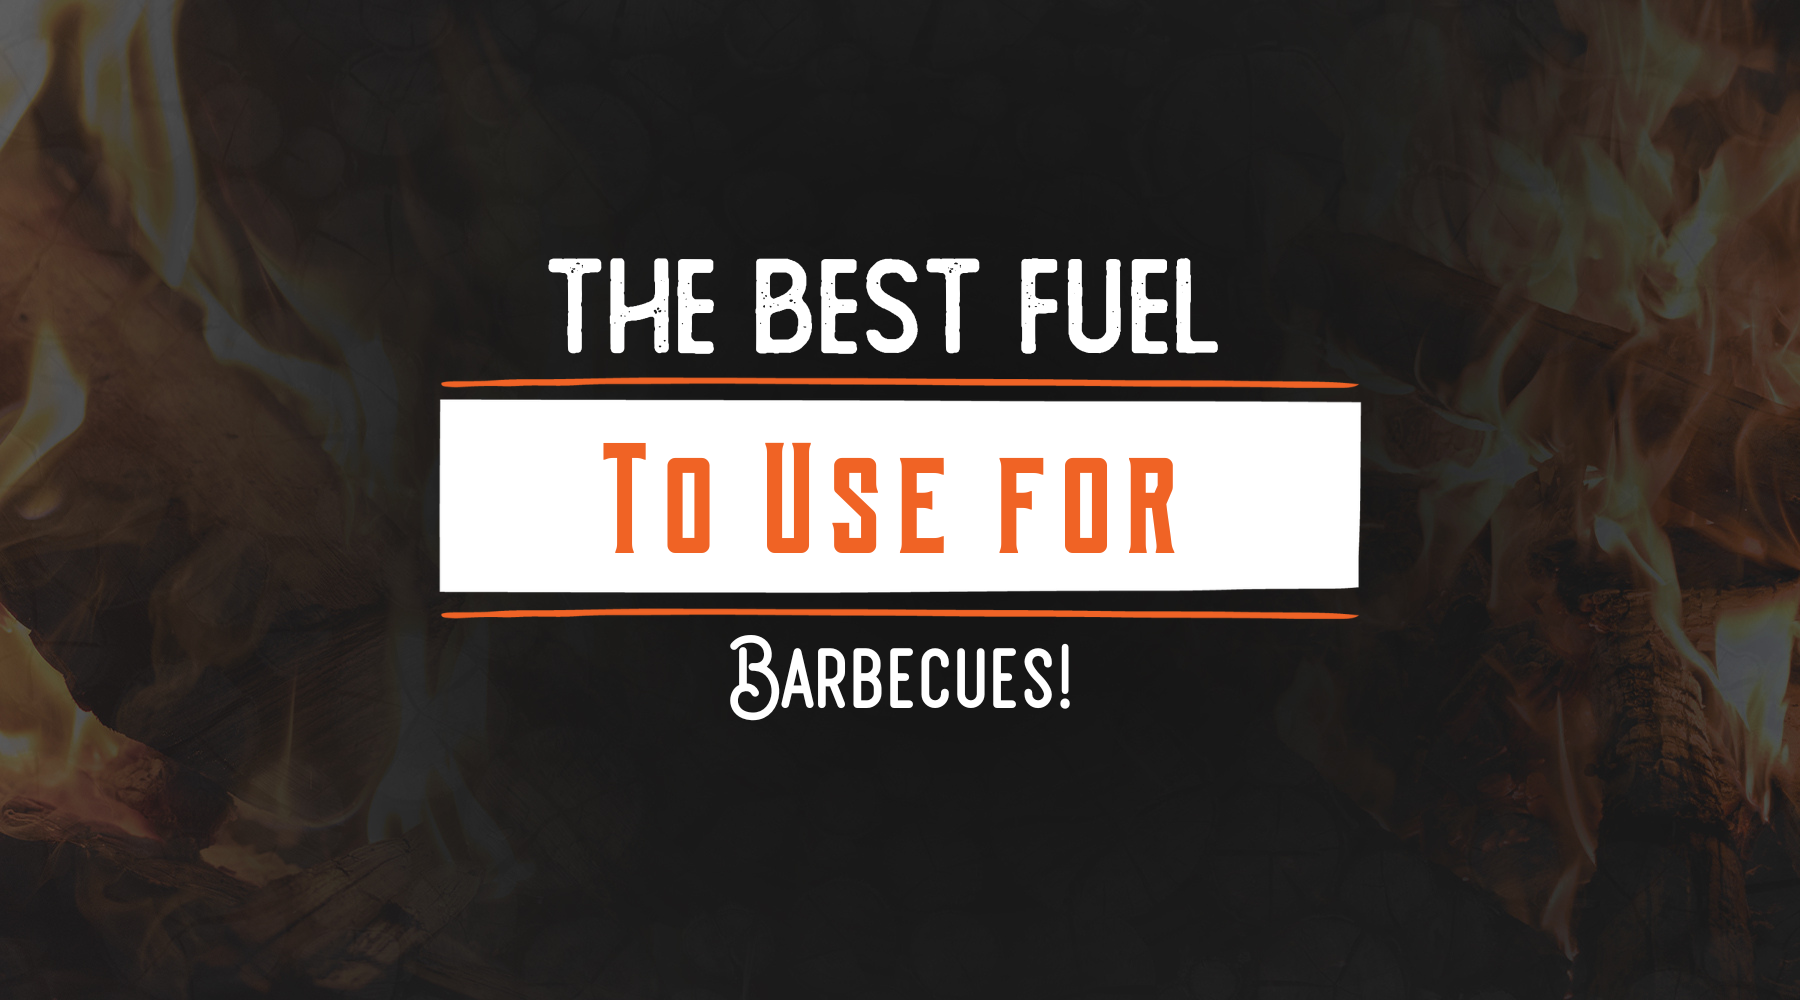 The best fuel to use for Barbecues